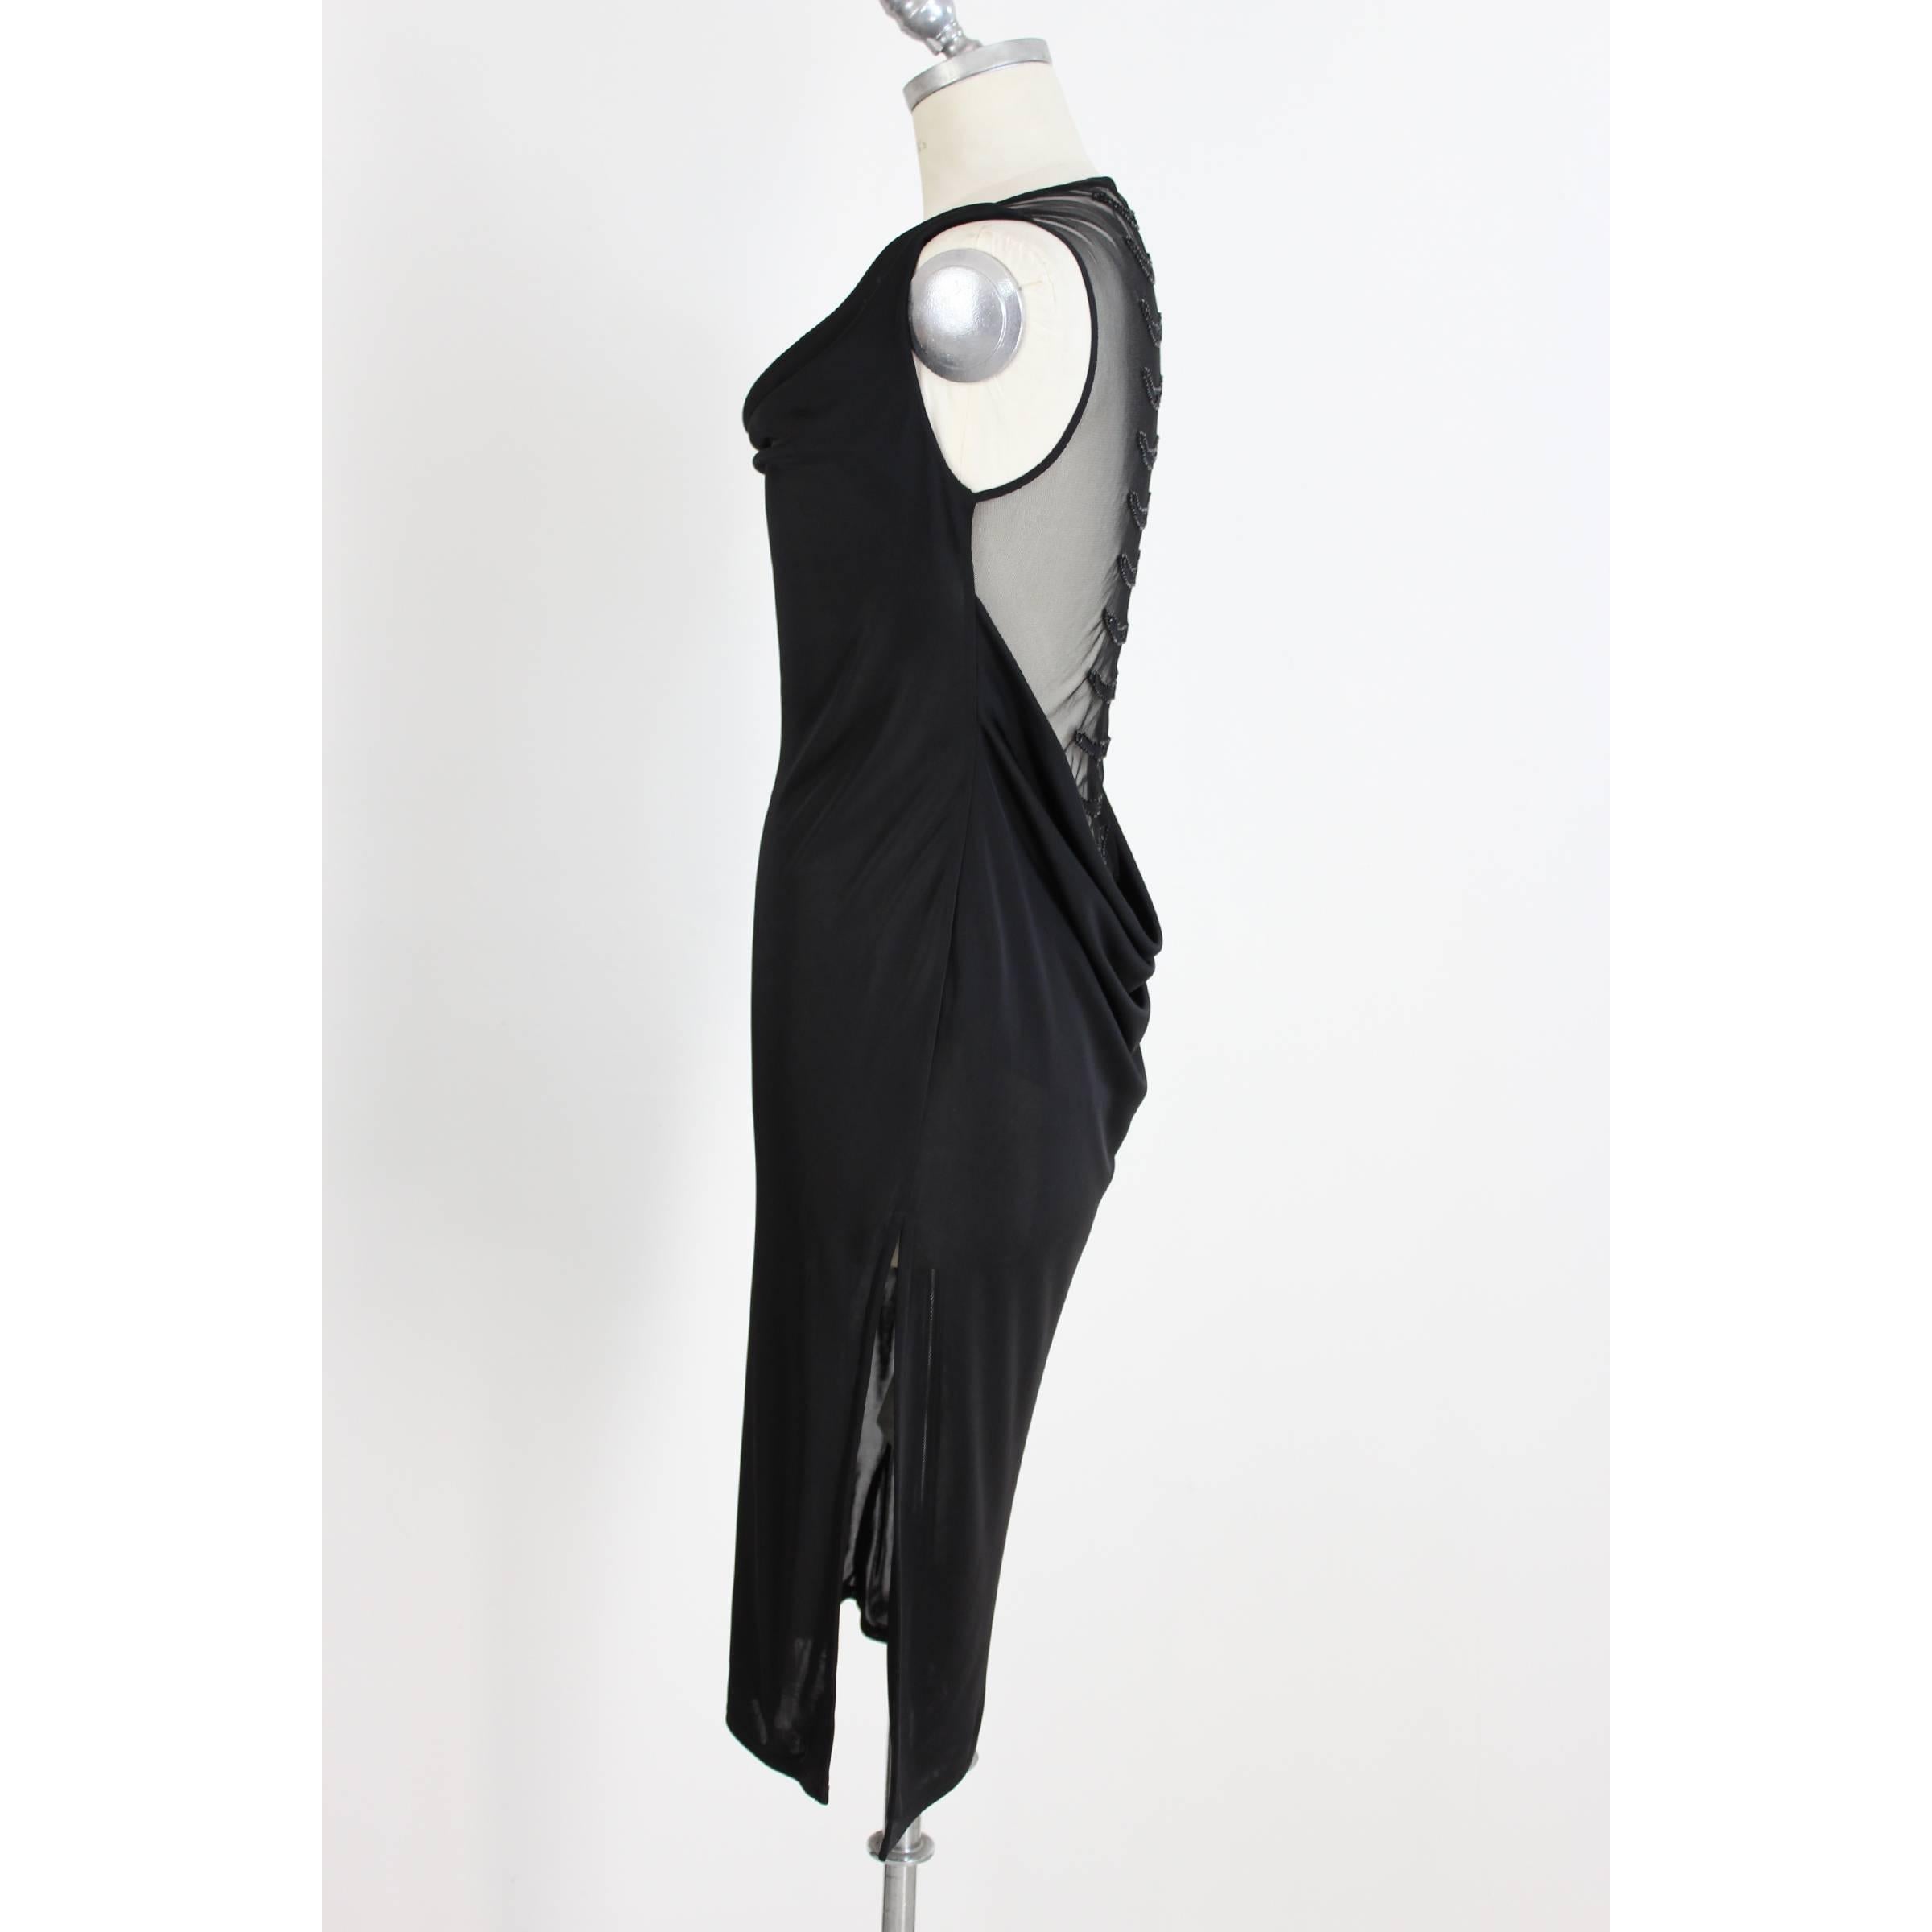 Richmond Long Dress Ceremony Vintage Black In Excellent Condition For Sale In Brindisi, IT